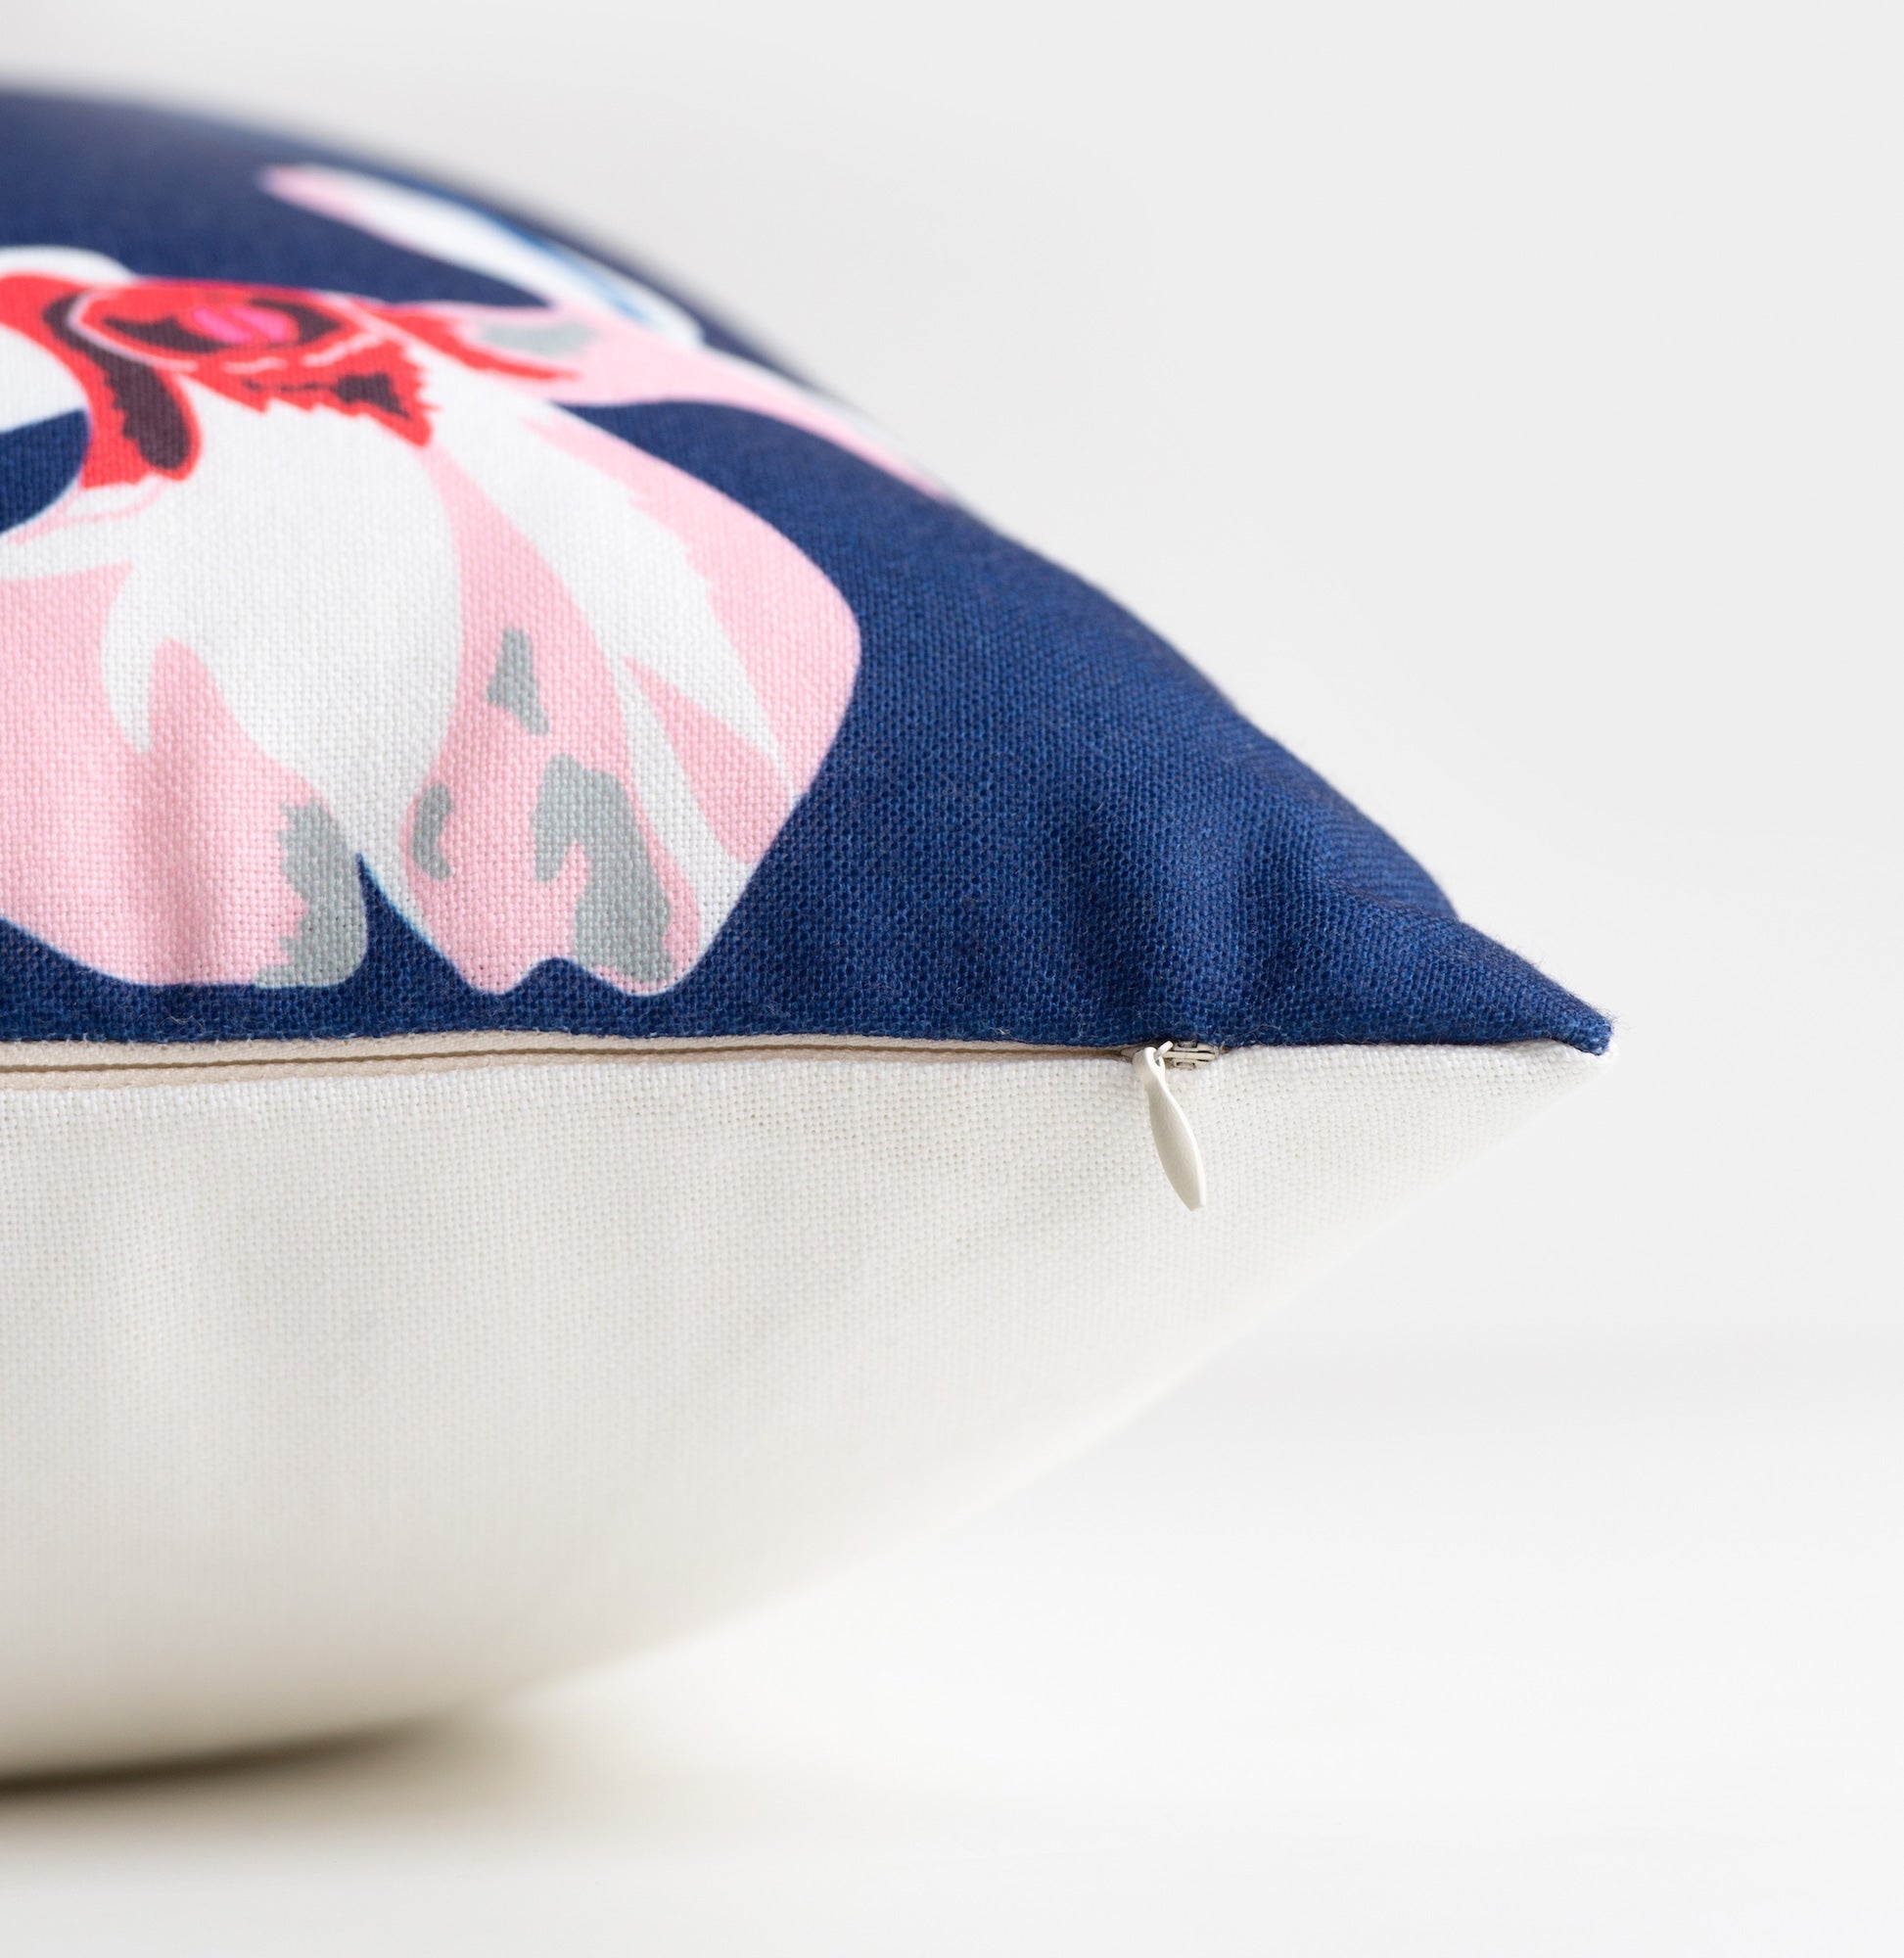 Spring Indoor Outdoor Pillow Cover, Floral, Navy Blue Pink, 18"x18"